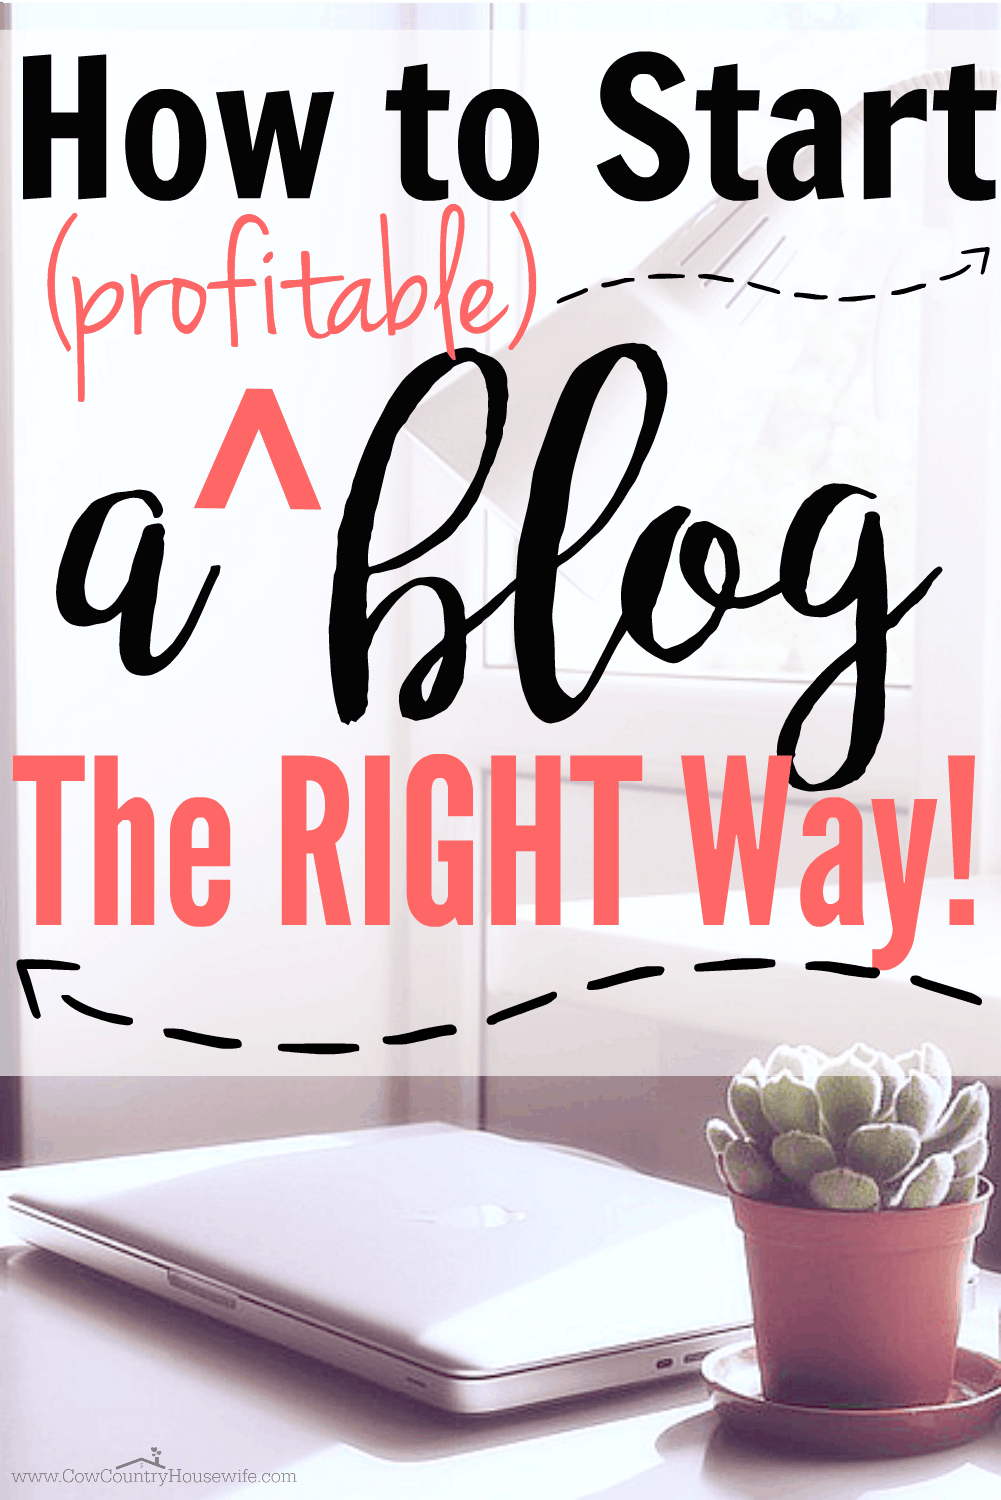 If you want to make money from blogging, you need to start here!! She really goes into detail about how EXACTLY to start a profitable blog the right way! 